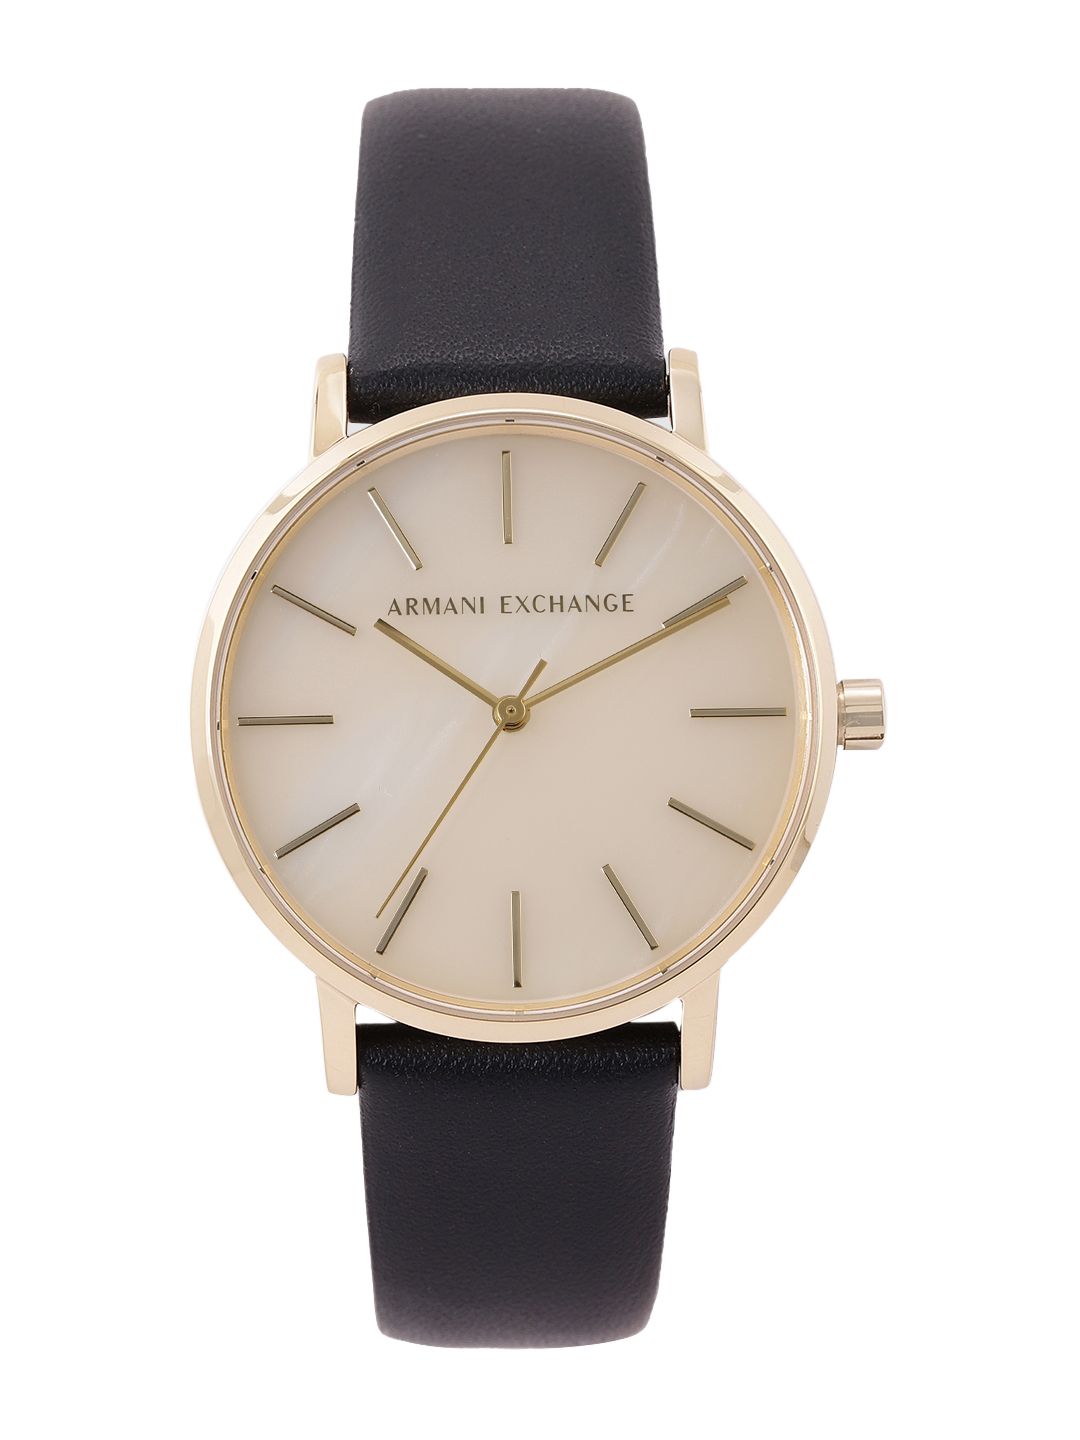 Armani Exchange Women Cream-Coloured Leather Analogue Watch AX5561 Price in India